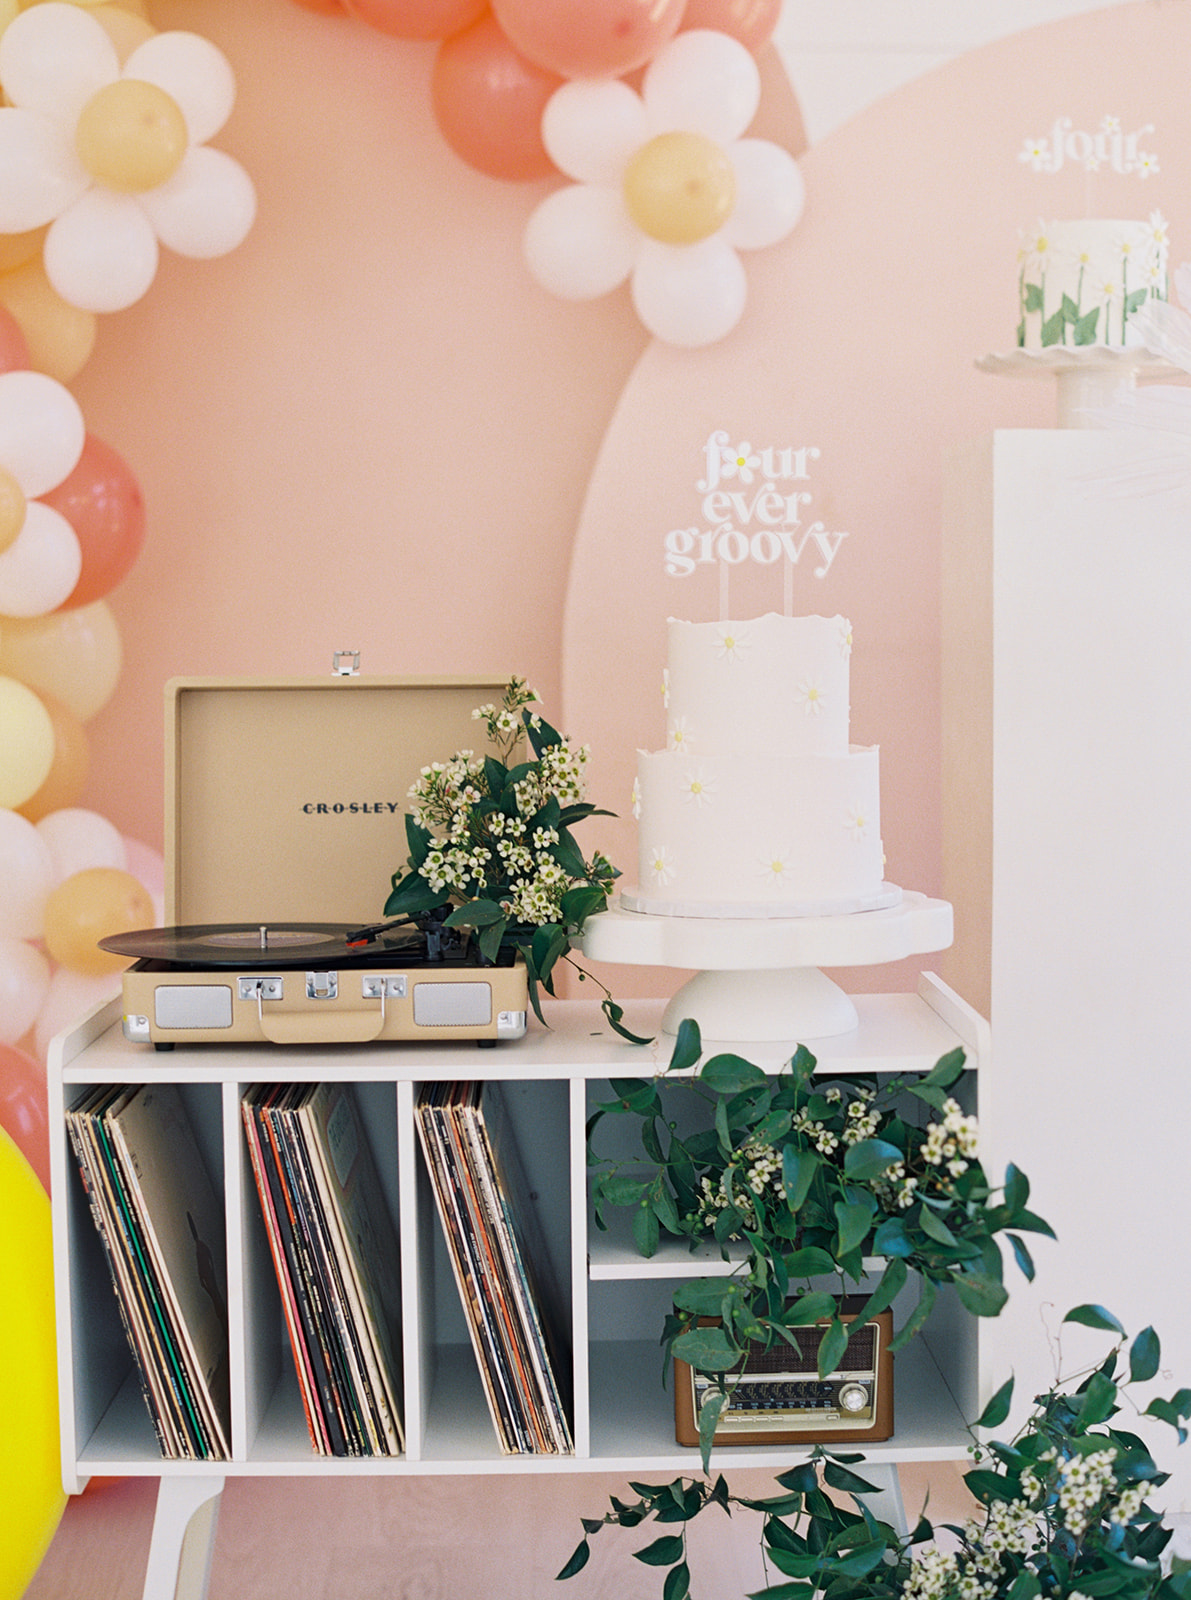 record player and cake table for groovy party theme